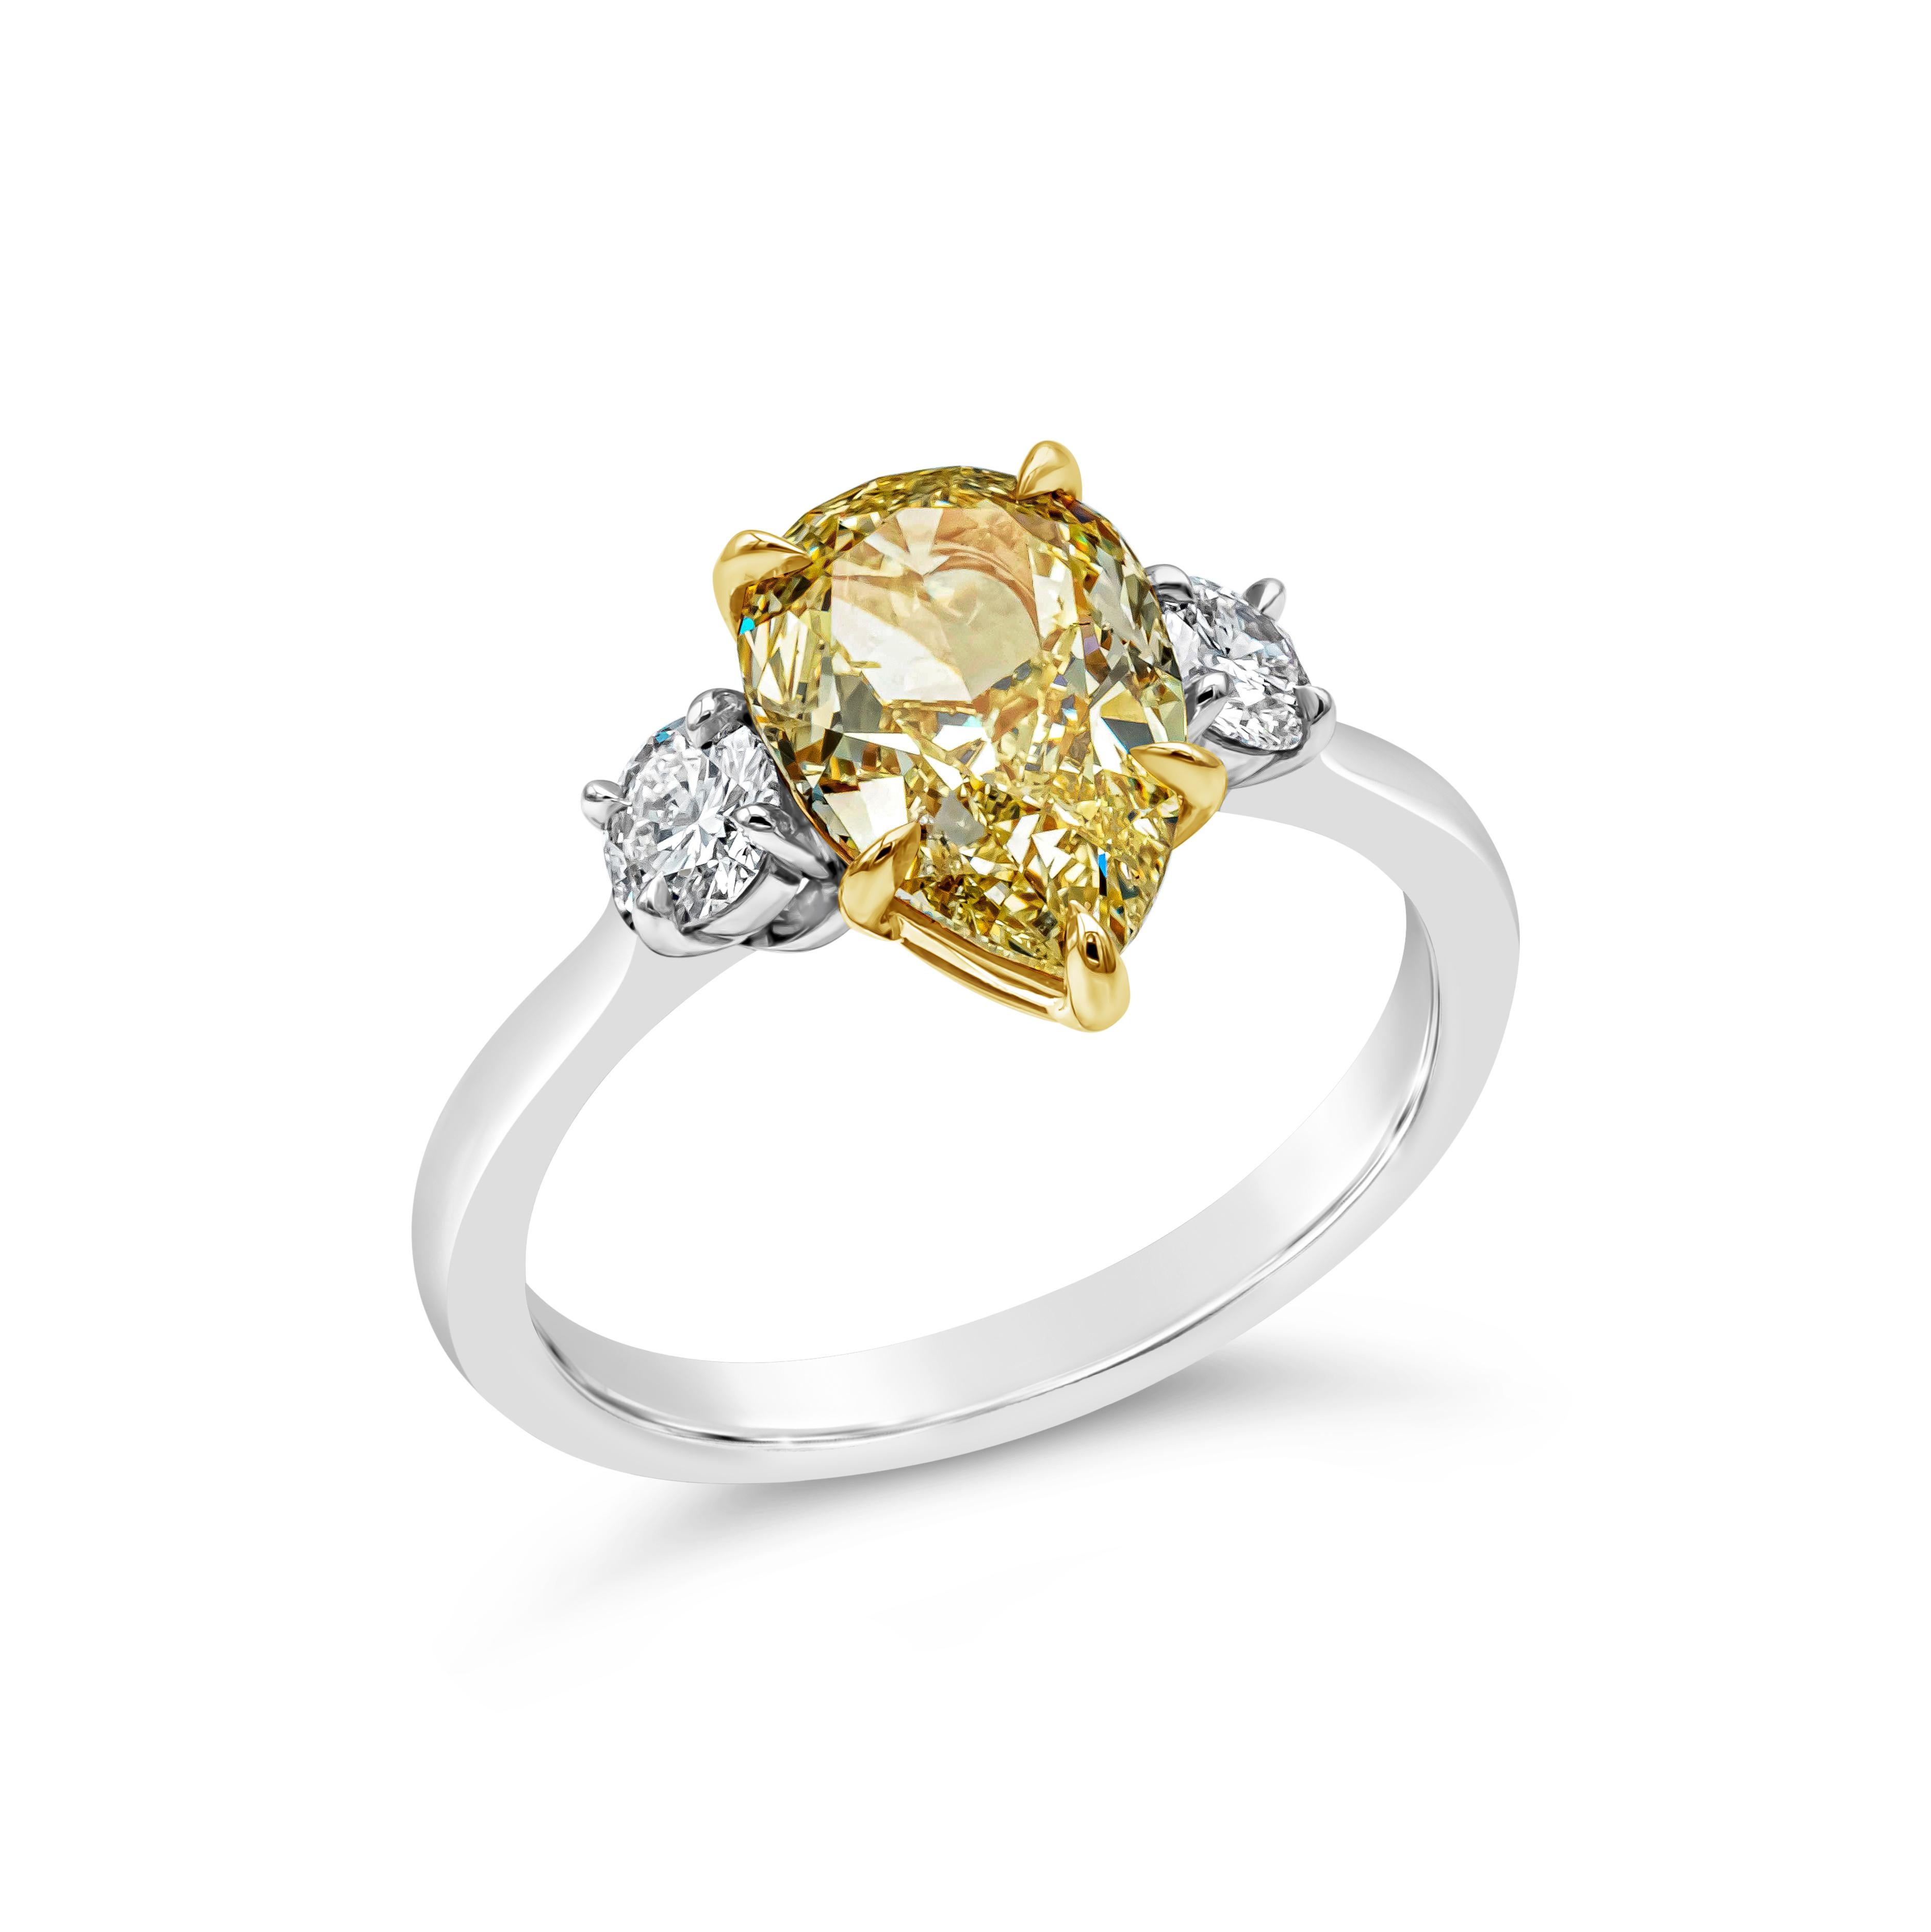 Contemporary GIA Certified 2.53 Carat Pear Shape Fancy Yellow Diamond Engagement Ring For Sale